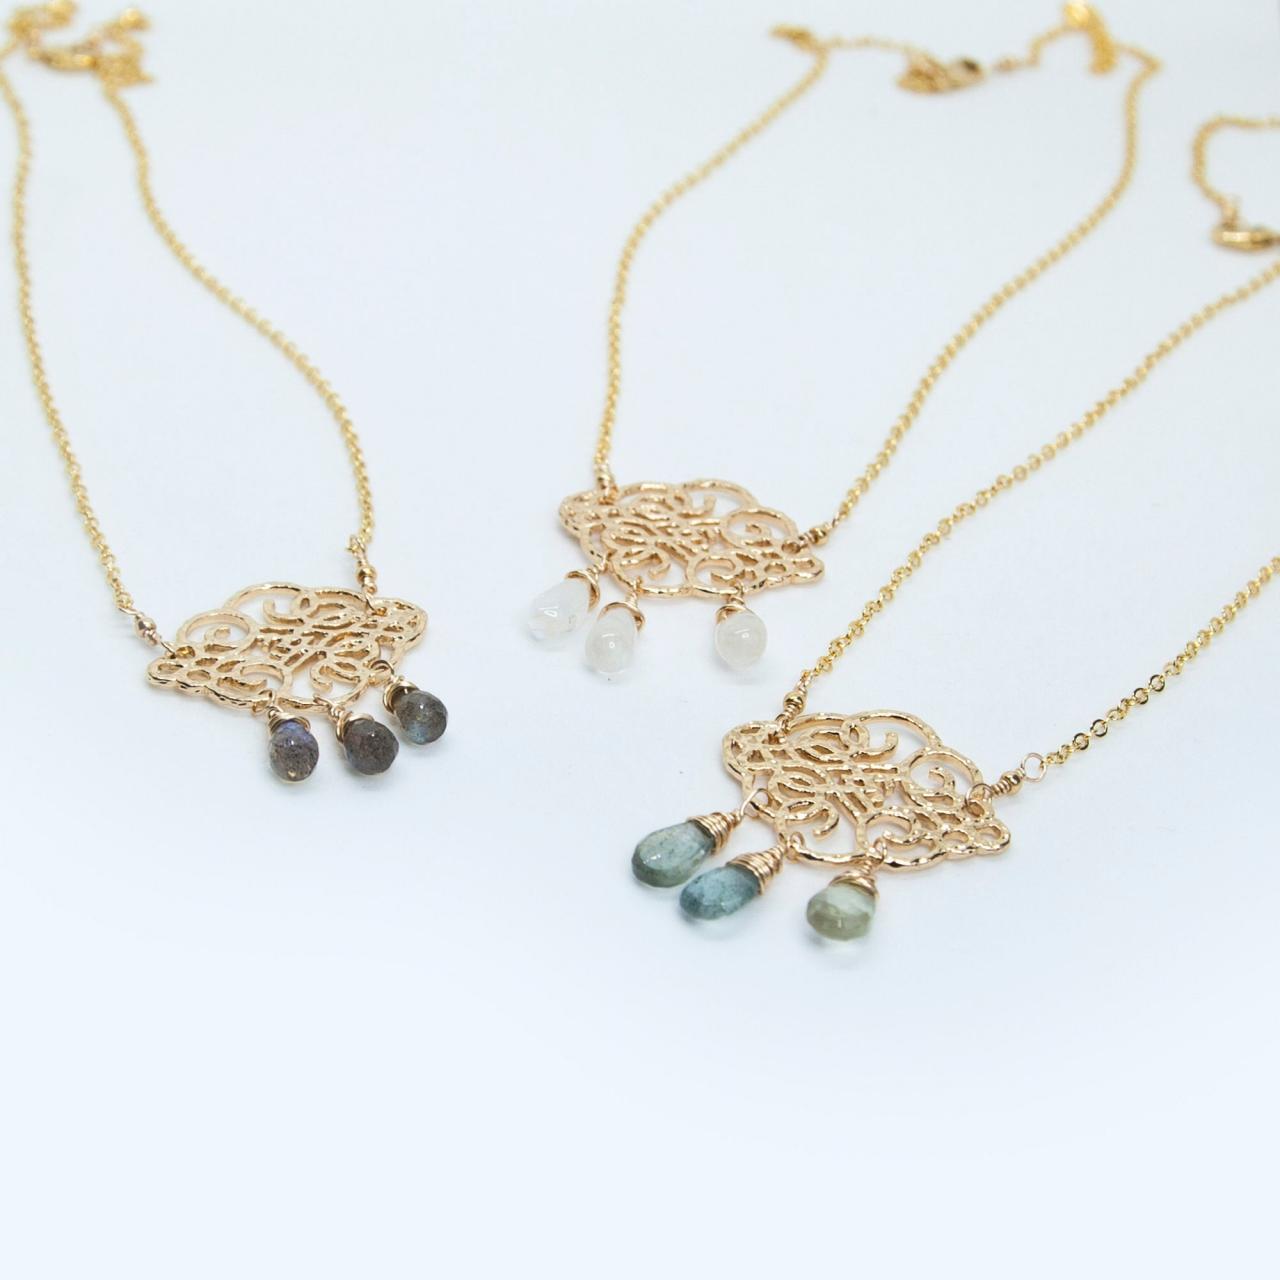 Cloud Necklace, Gemstone Rain Necklace, Gold Hammered Pendant Necklace, Gem Drops Necklace, Delicate Statement Jewelry